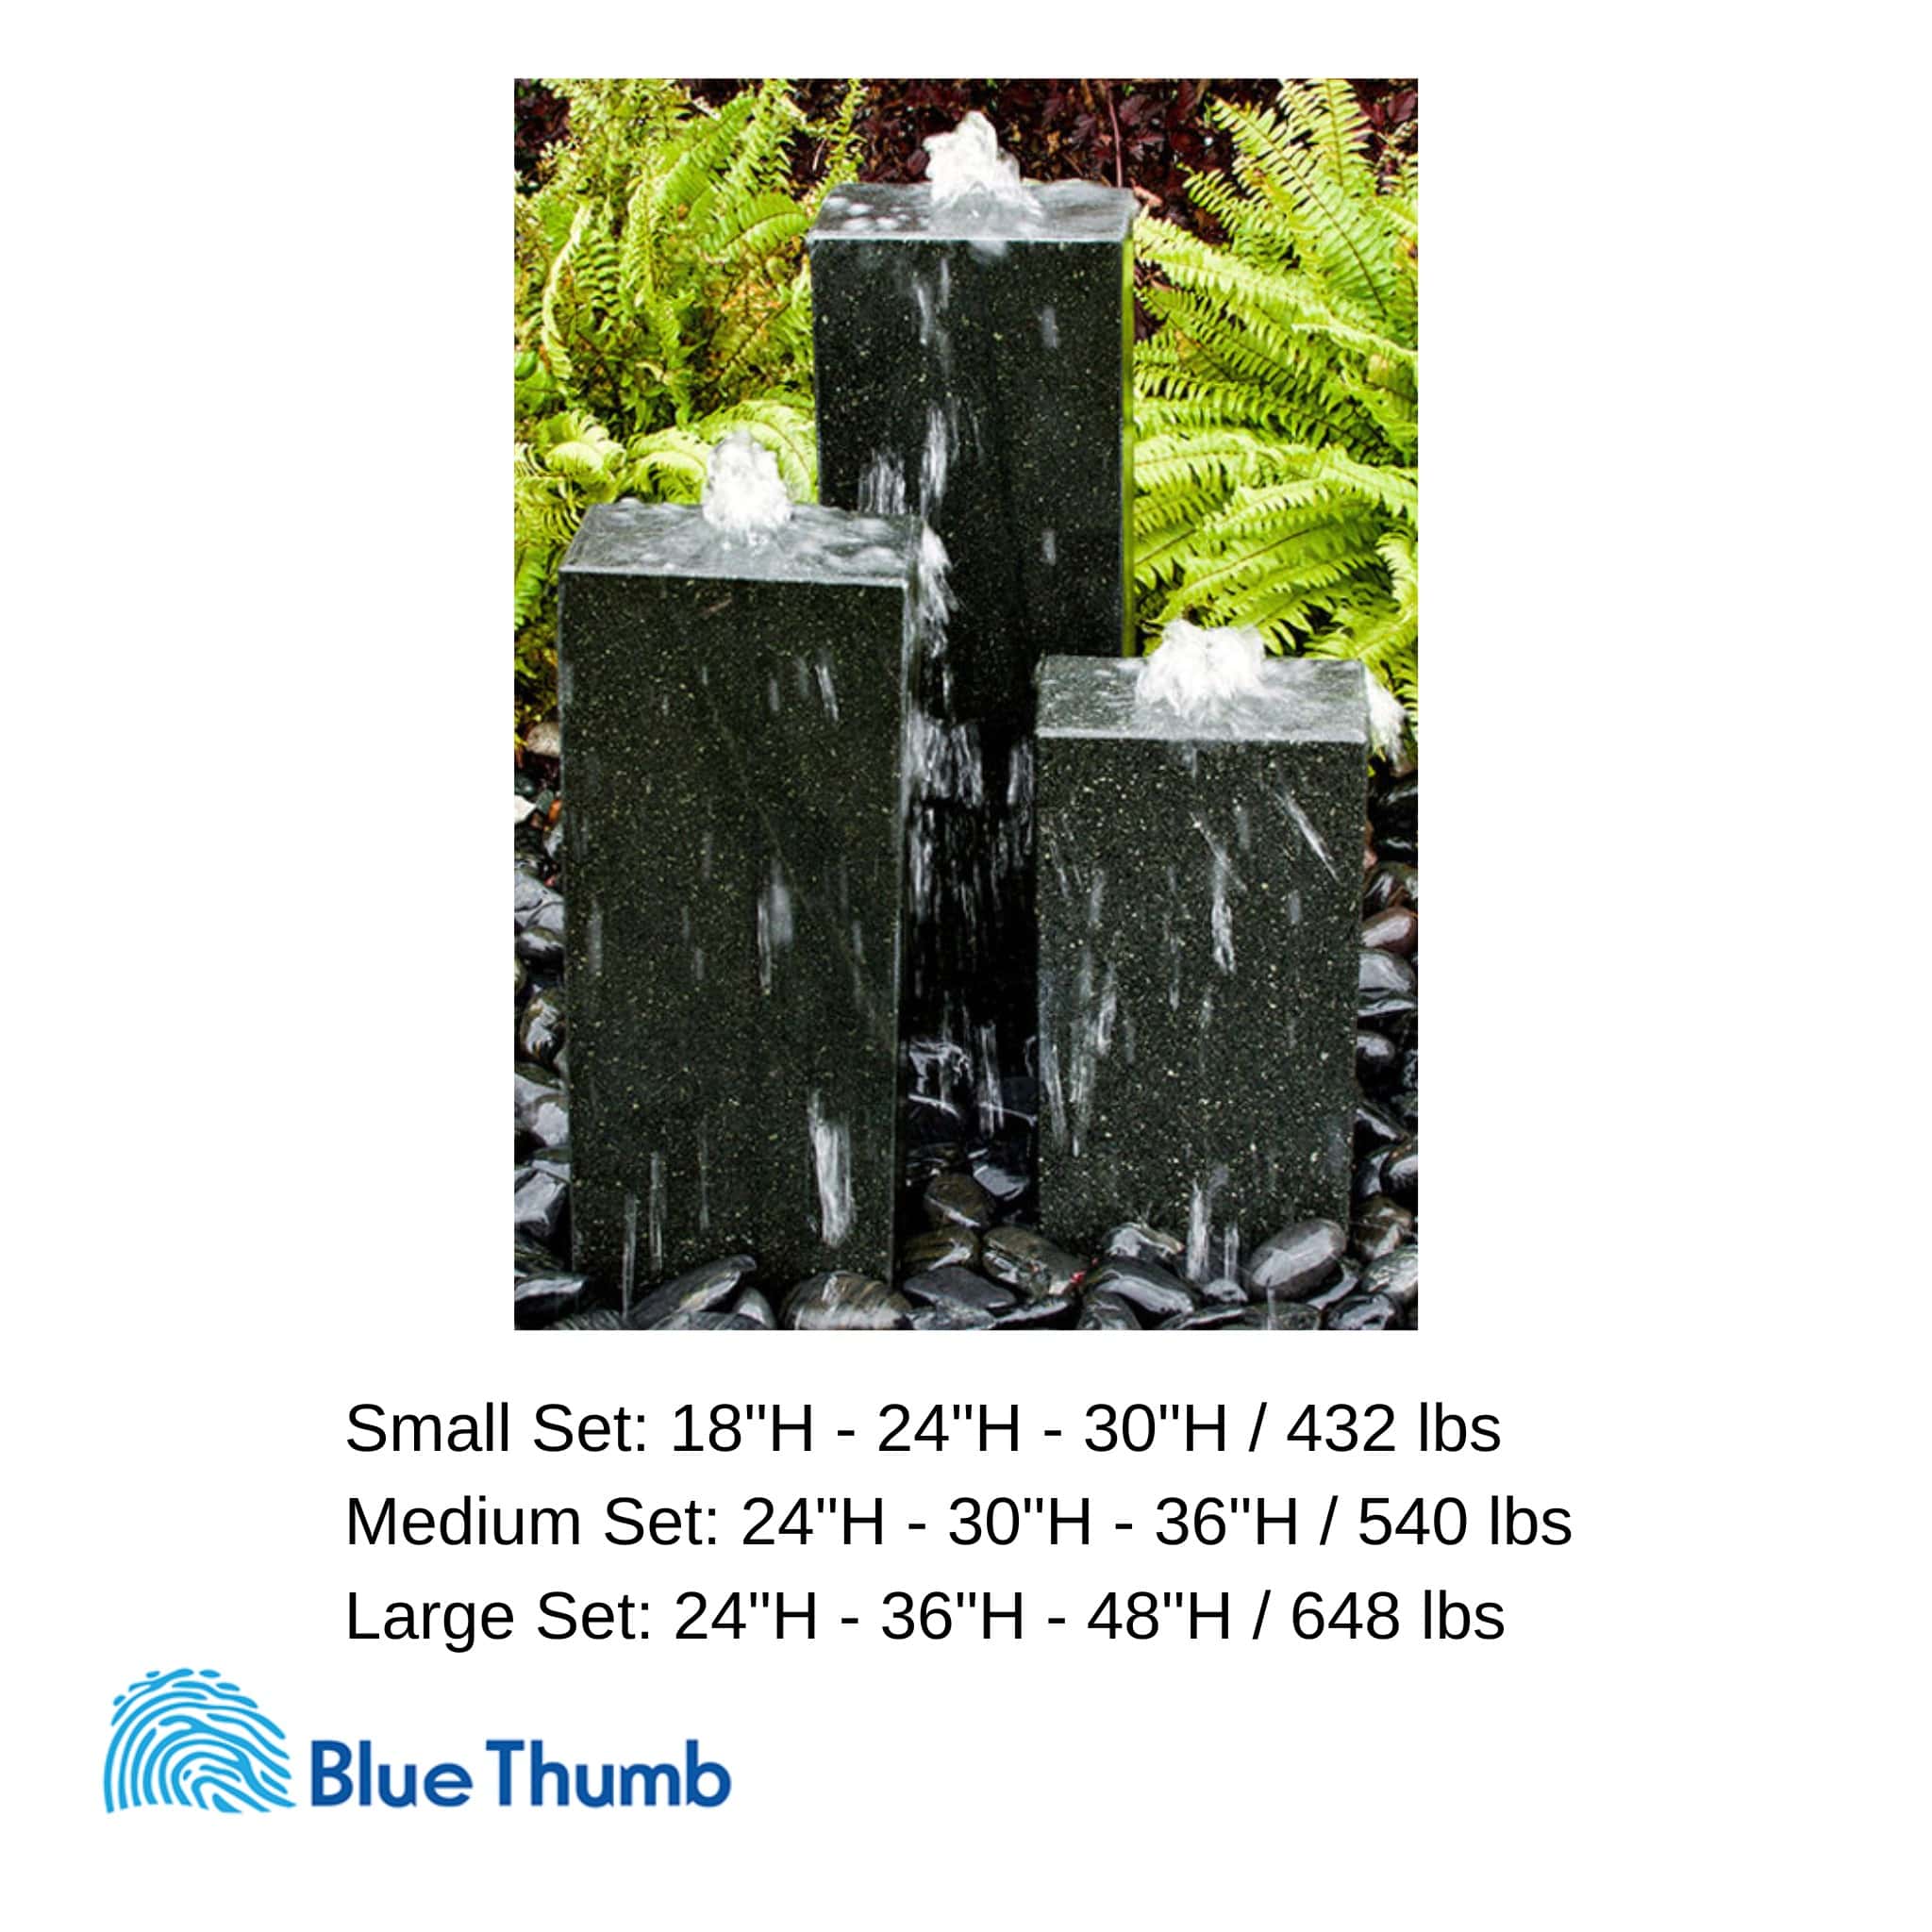 Smooth Black Granite 3-Tower Fountain - Complete Kit - Blue Thumb